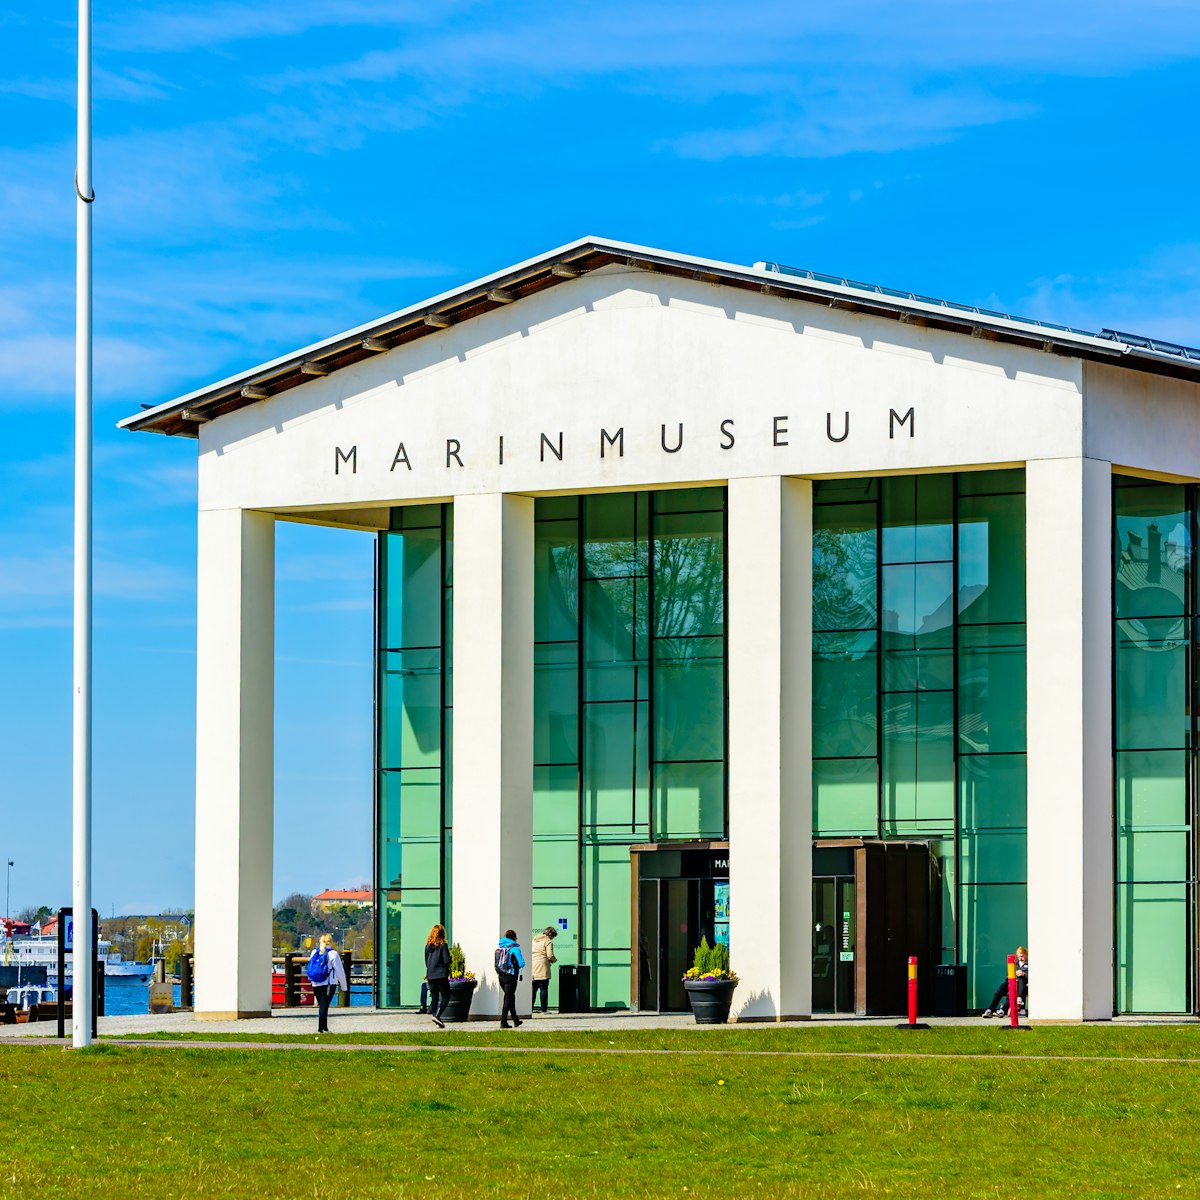 The entrance to the Marinmuseum.